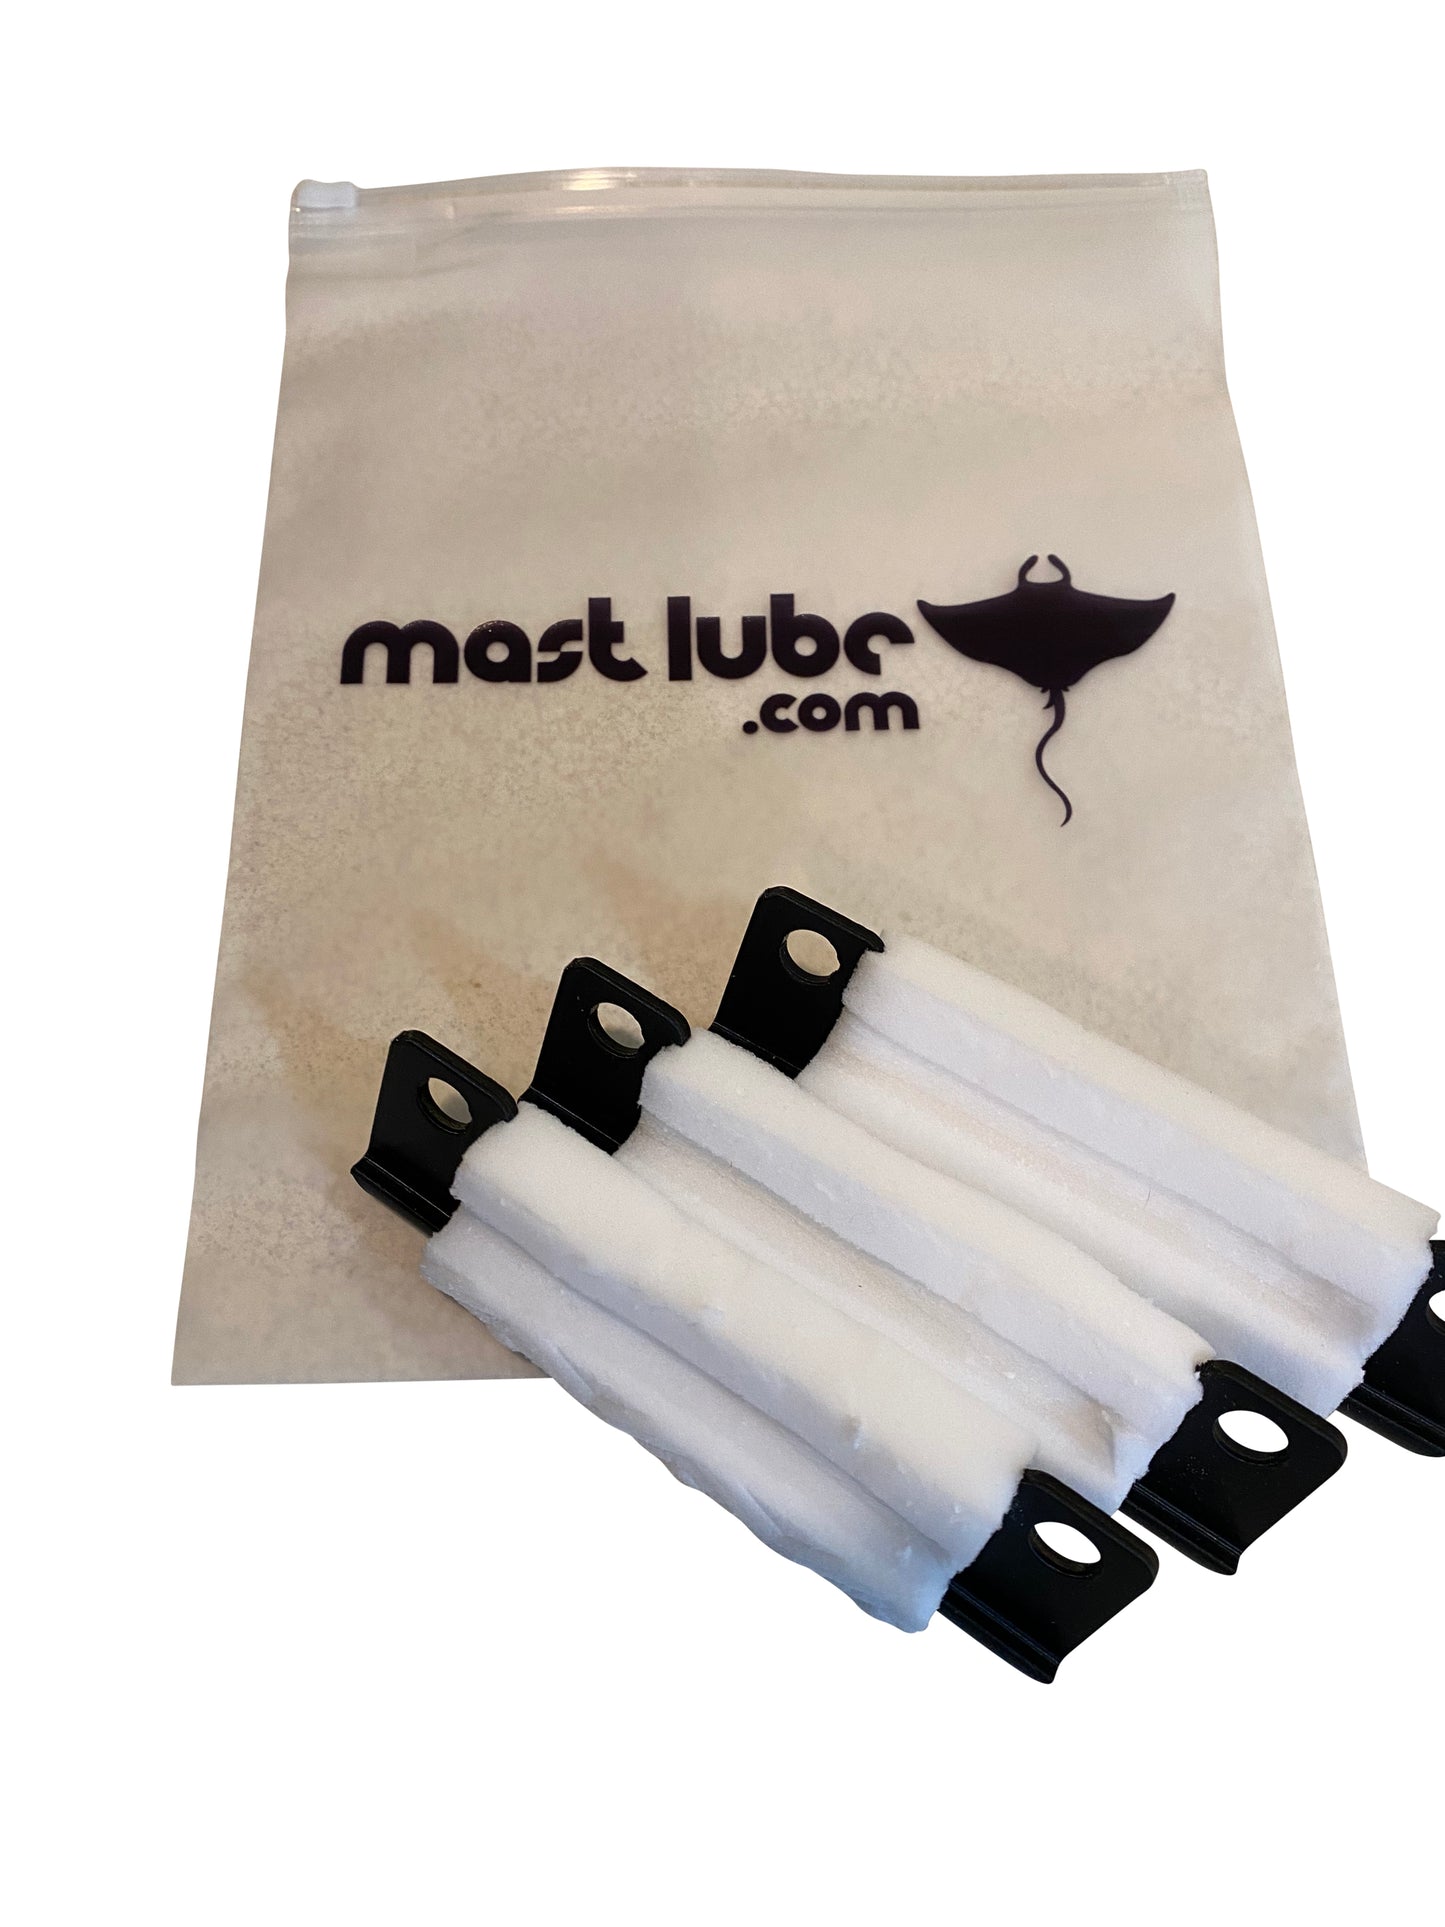 Lube your mast track with LubeSlugs by MastLube.  Sailboat mainsail mast track 